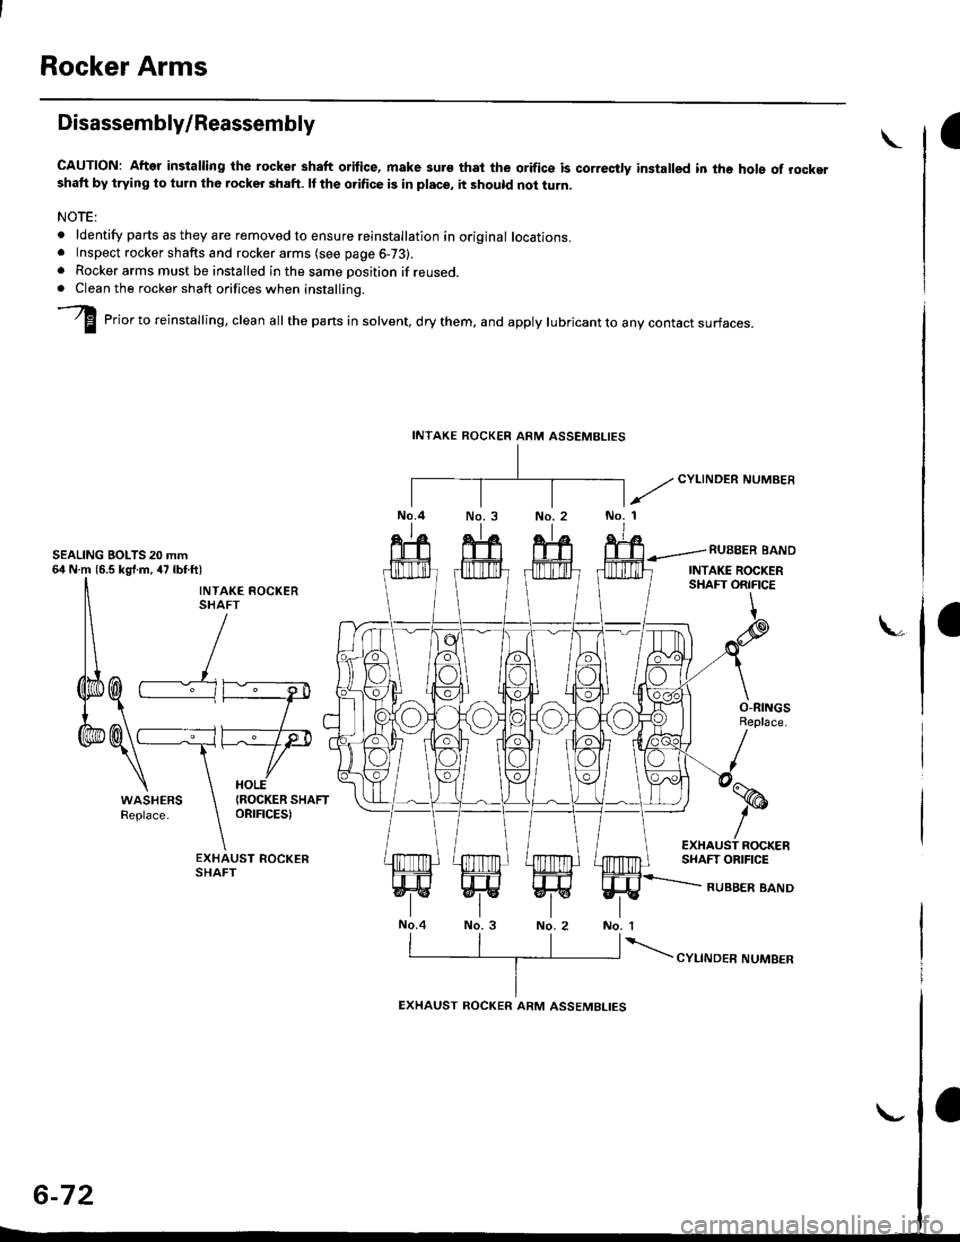 HONDA CIVIC 1996 6.G Owners Manual Rocker Arms
Disassembly/Reassembly
CAUTION: After installing the rocker shaft oritice, make suro thot the orifics is correctly installed in the hole of rockershaft by trying to turn the rocker shaft. 